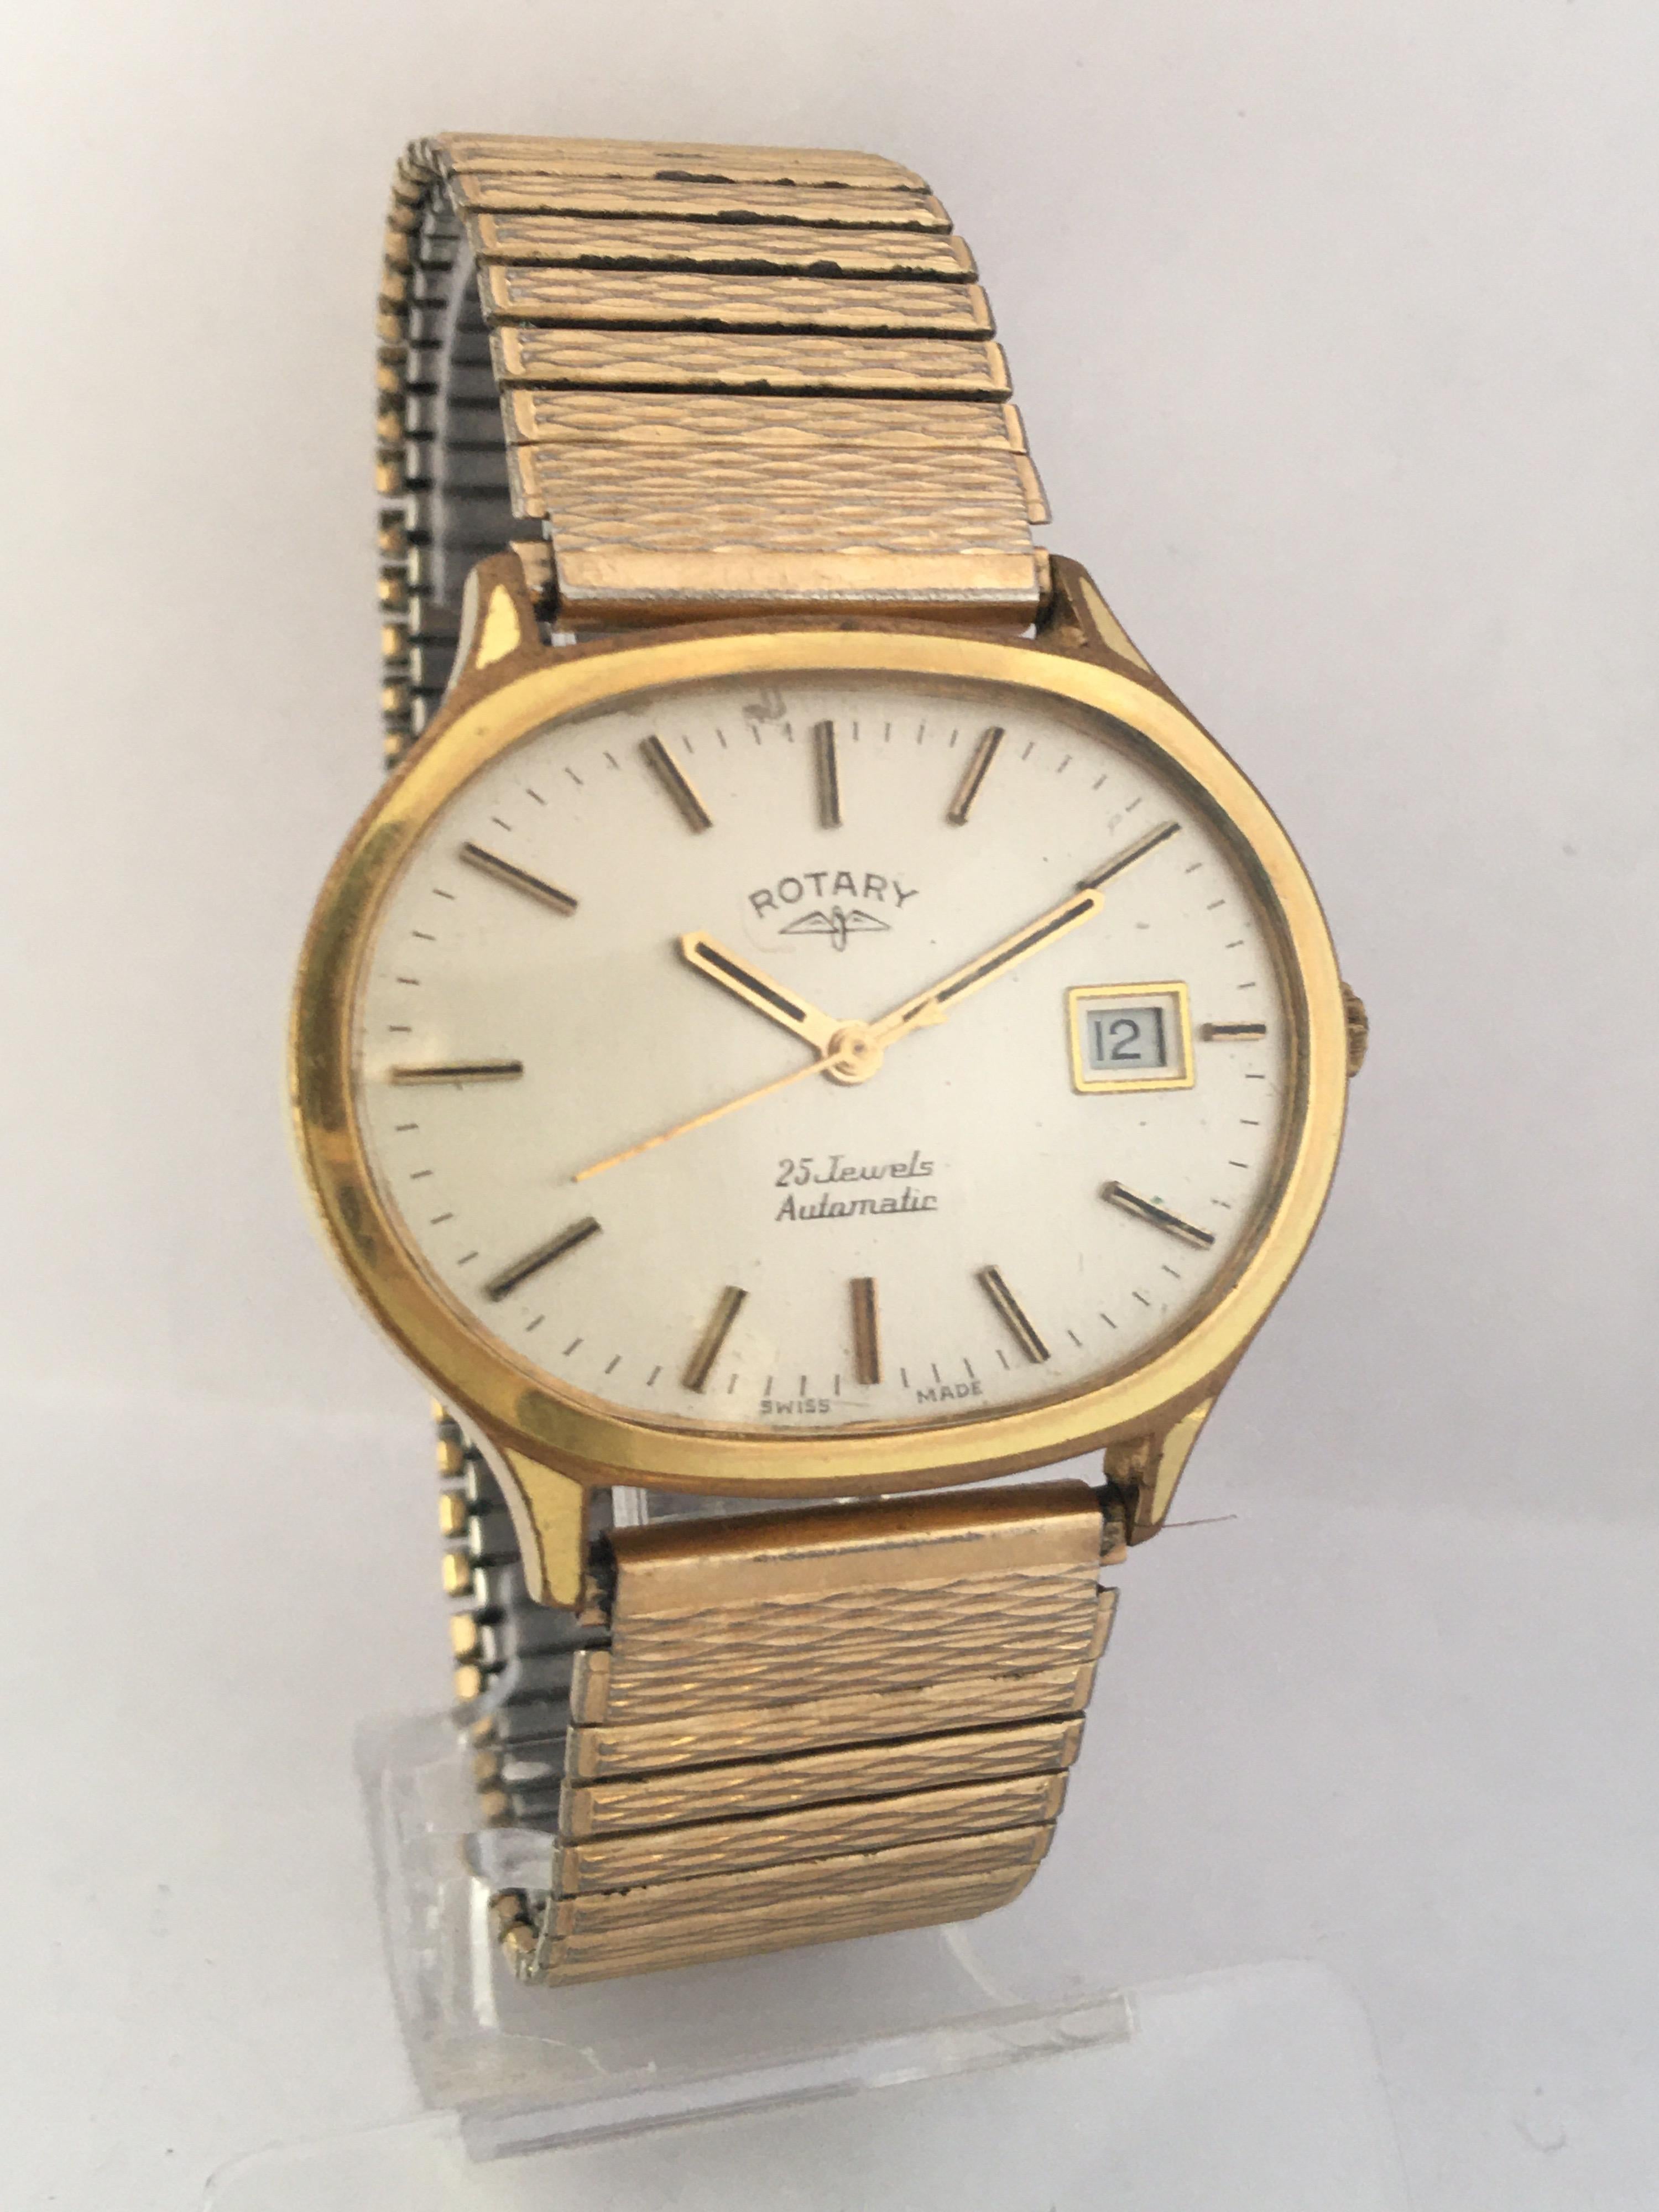 Vintage 1970s Gold-Plated/ Stainless Steel Back ROTARY 25 Jewels Automatic Watch 9